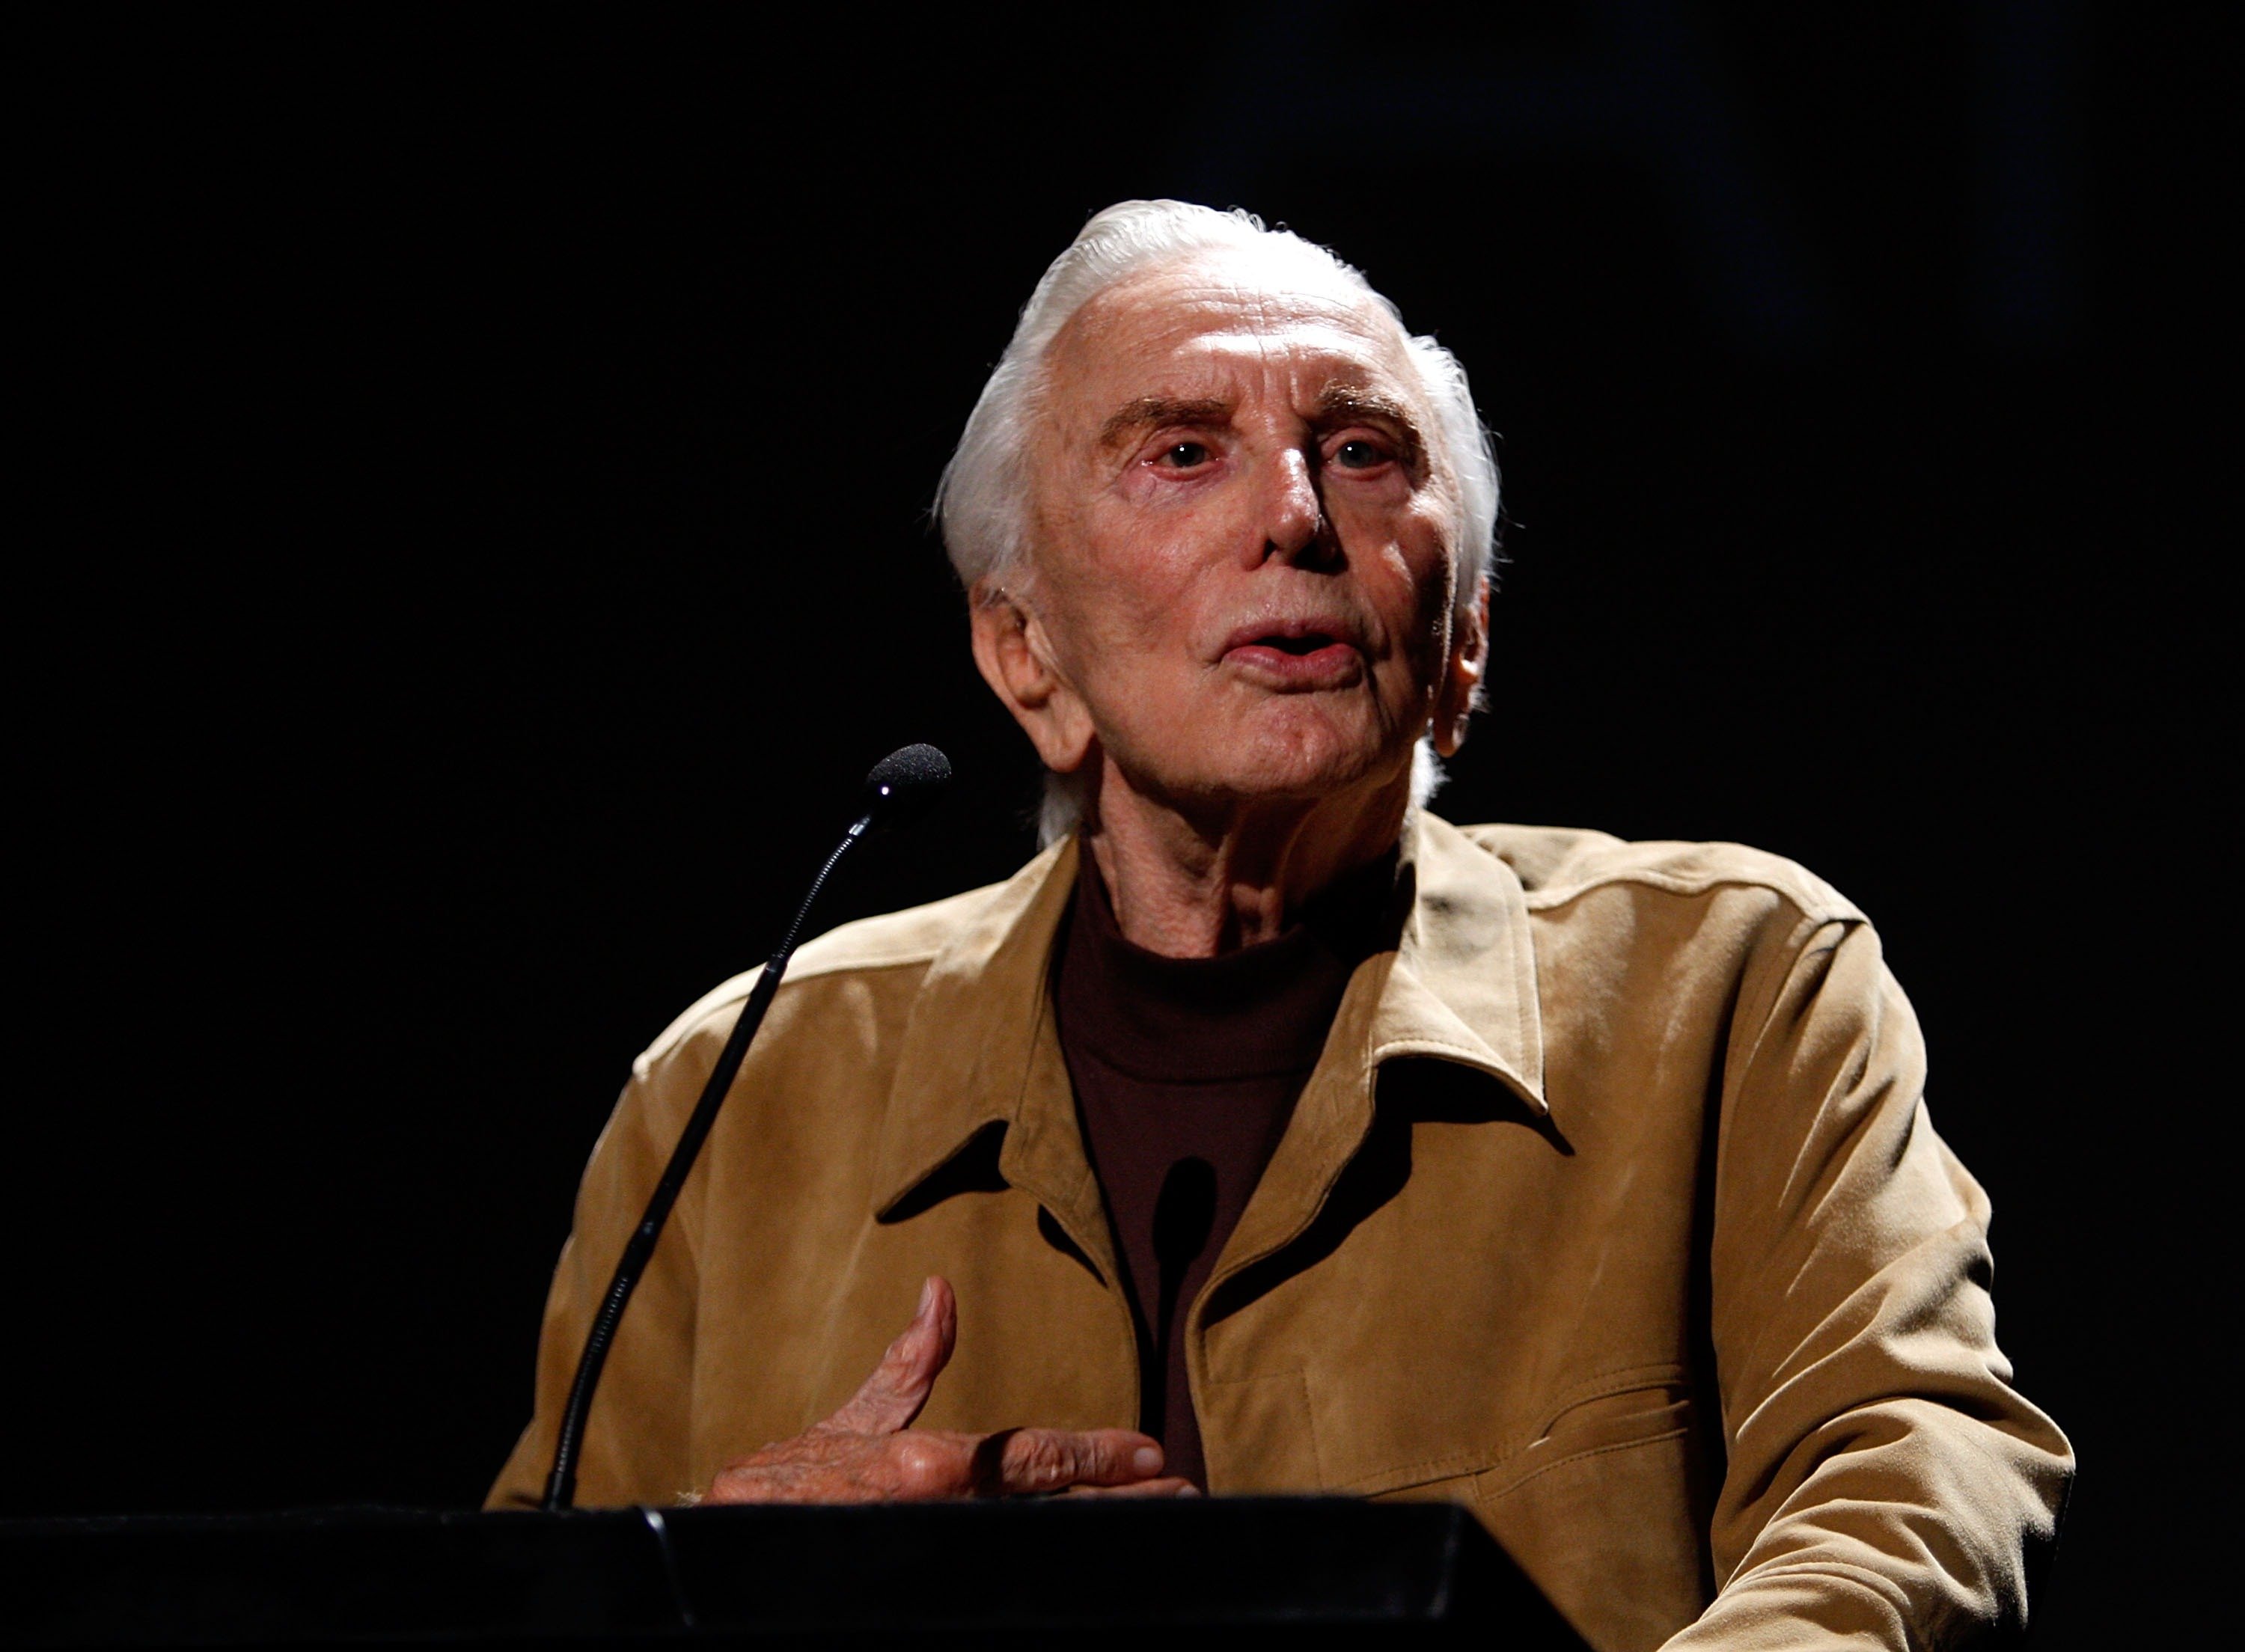 Kirk Douglas presents the film "Spartacus" at AFI's 40th Anniversary celebration presented by Target held at Arclight Cinemas on October 3, 2007 | Photo: GettyImages